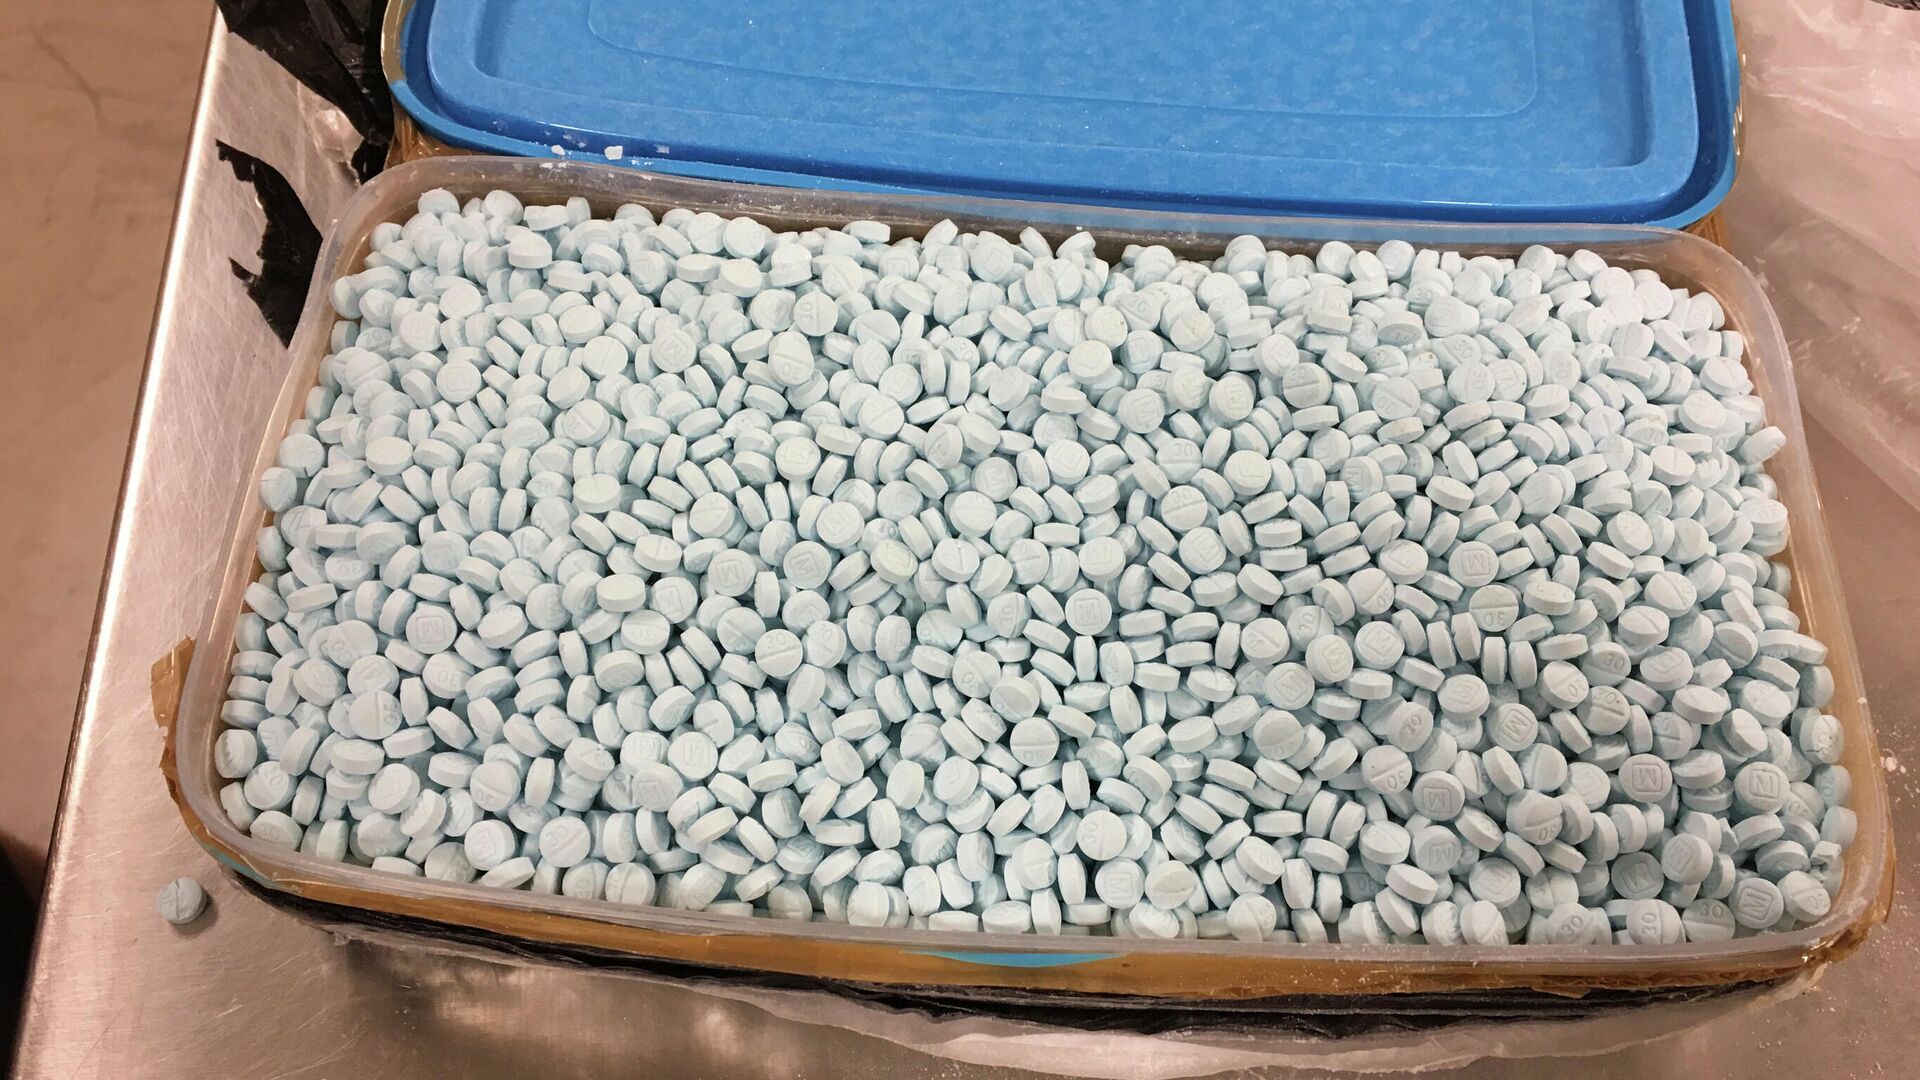 This photo provided by the U.S. Drug Enforcement Administration's Phoenix Division shows one of four containers holding some of the 30,000 fentanyl pills the agency seized in one of its bigger busts in Tempe, Ariz., in August 2017. Fentanyl is a potent synthetic opioid. - Sputnik International, 1920, 31.07.2022